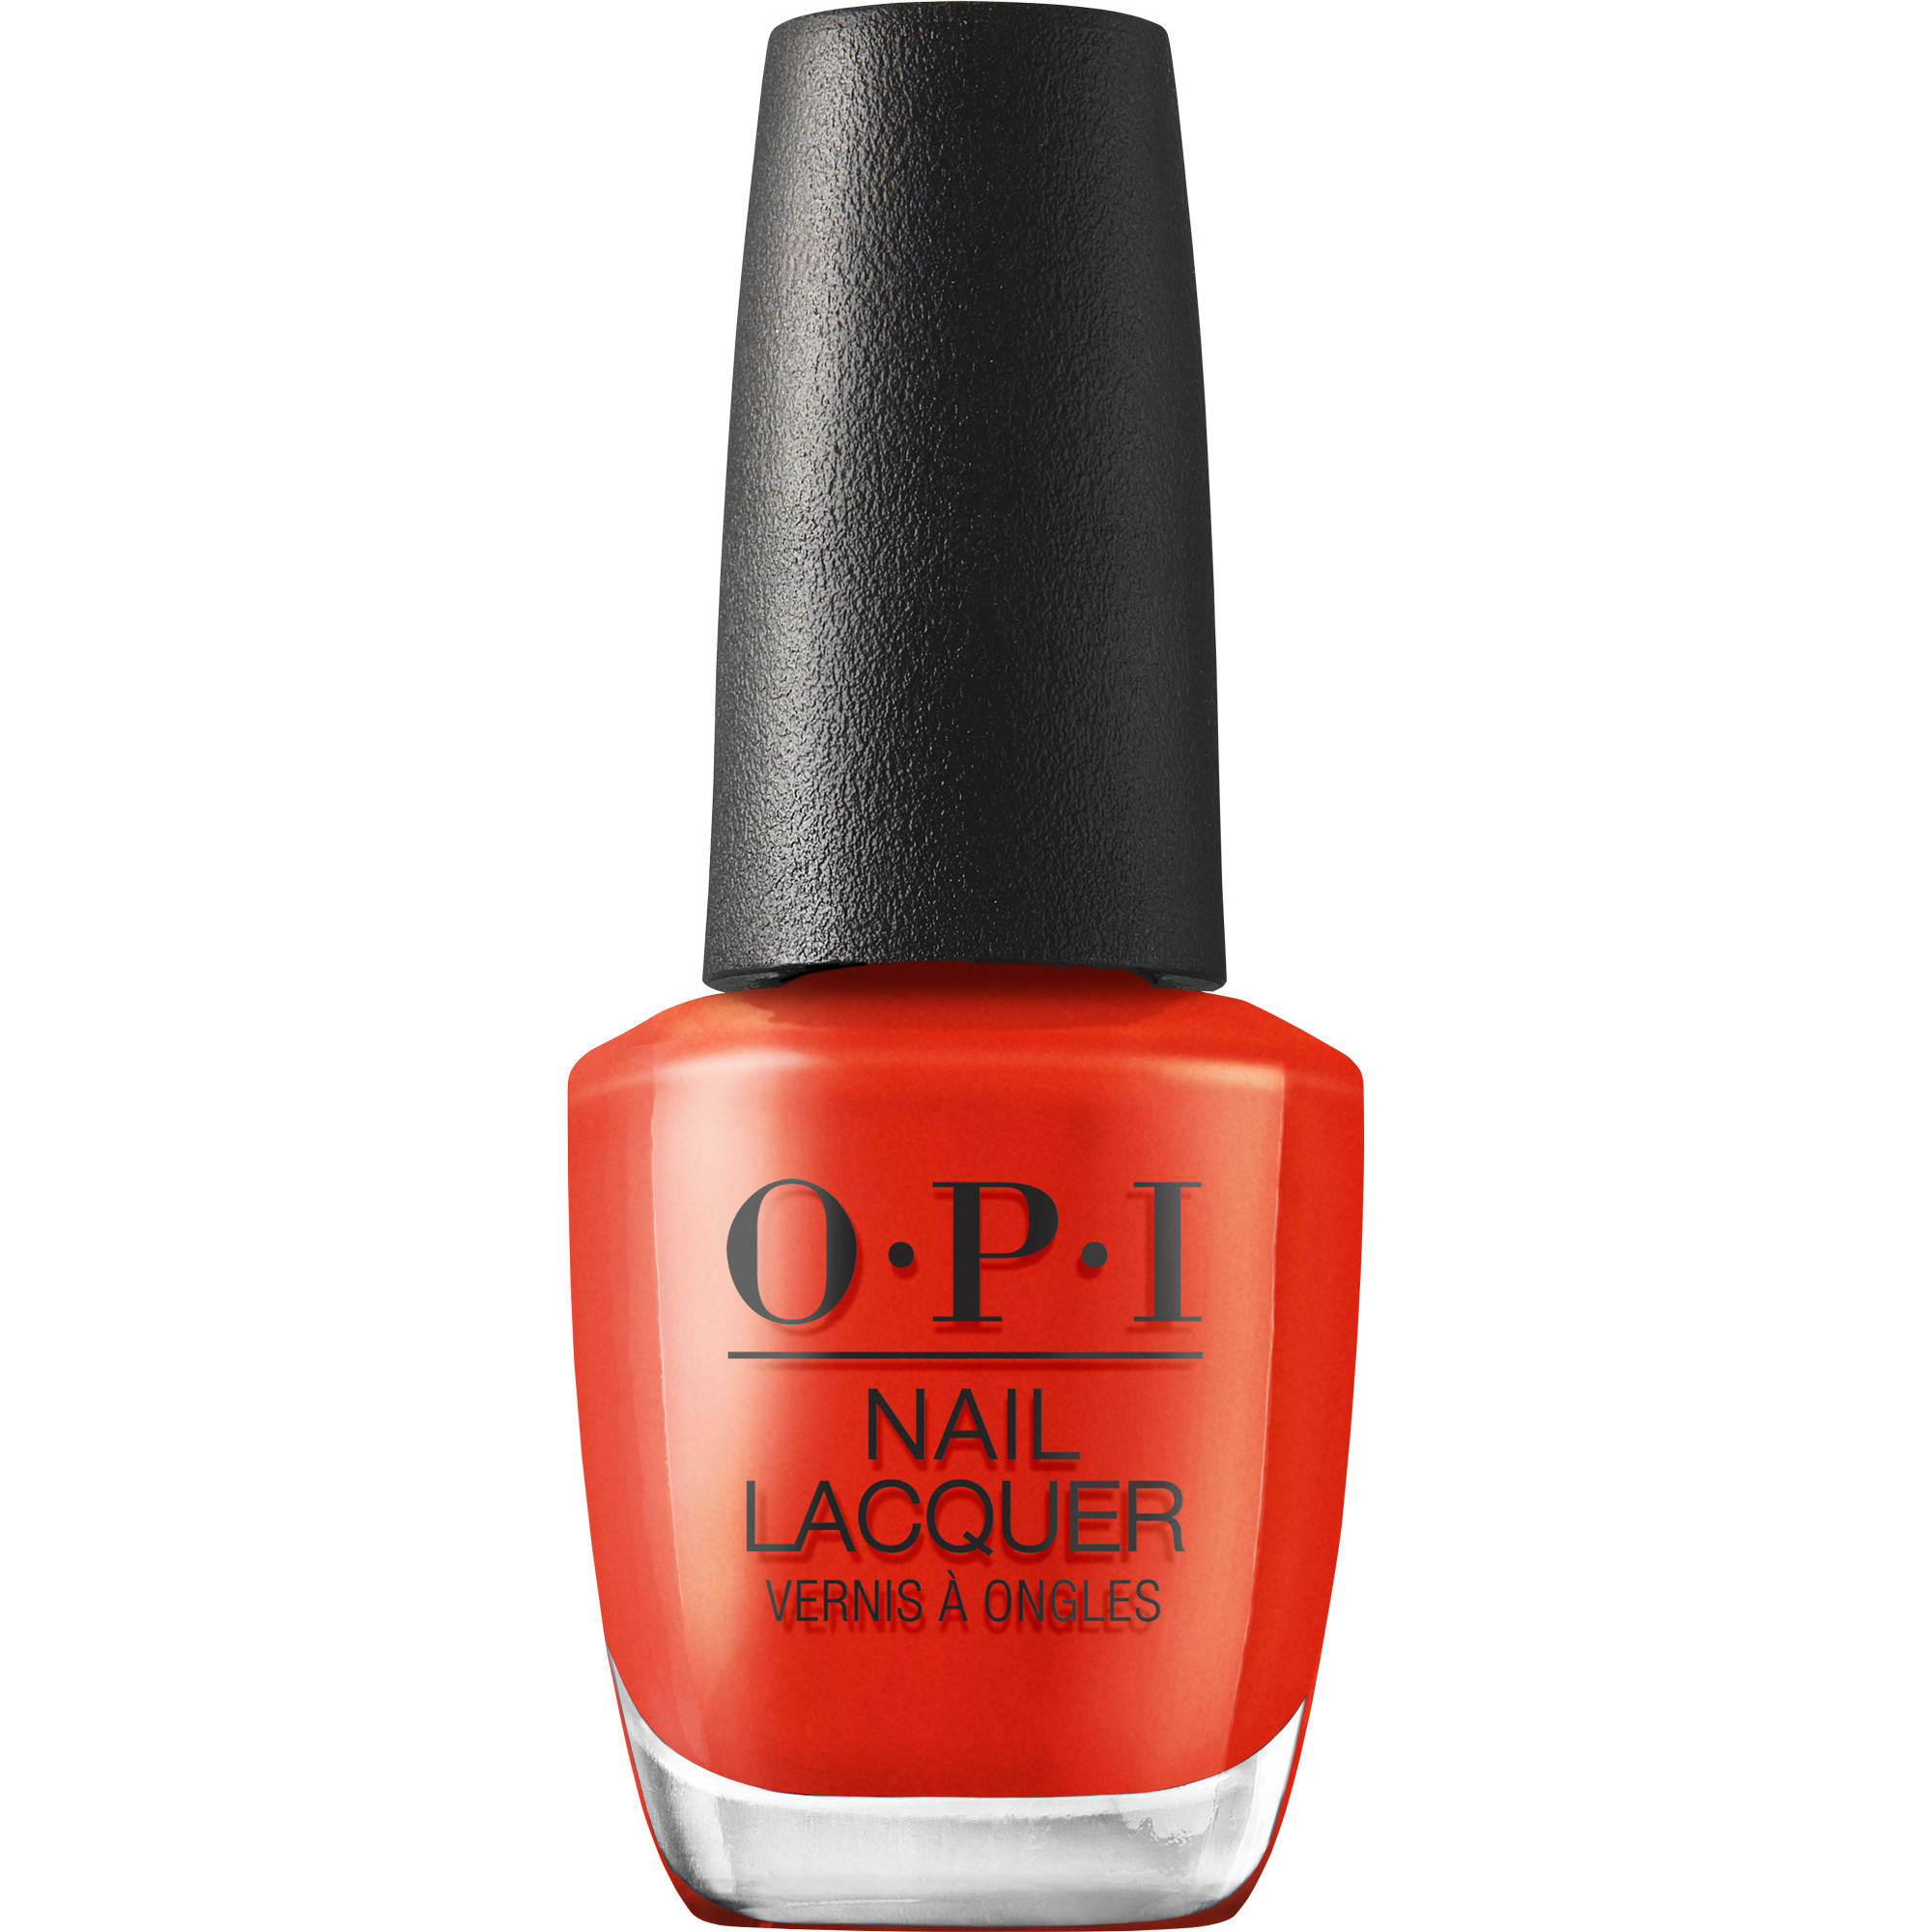 OPI Fall Wonders: Rust & Relaxation 0.5oz